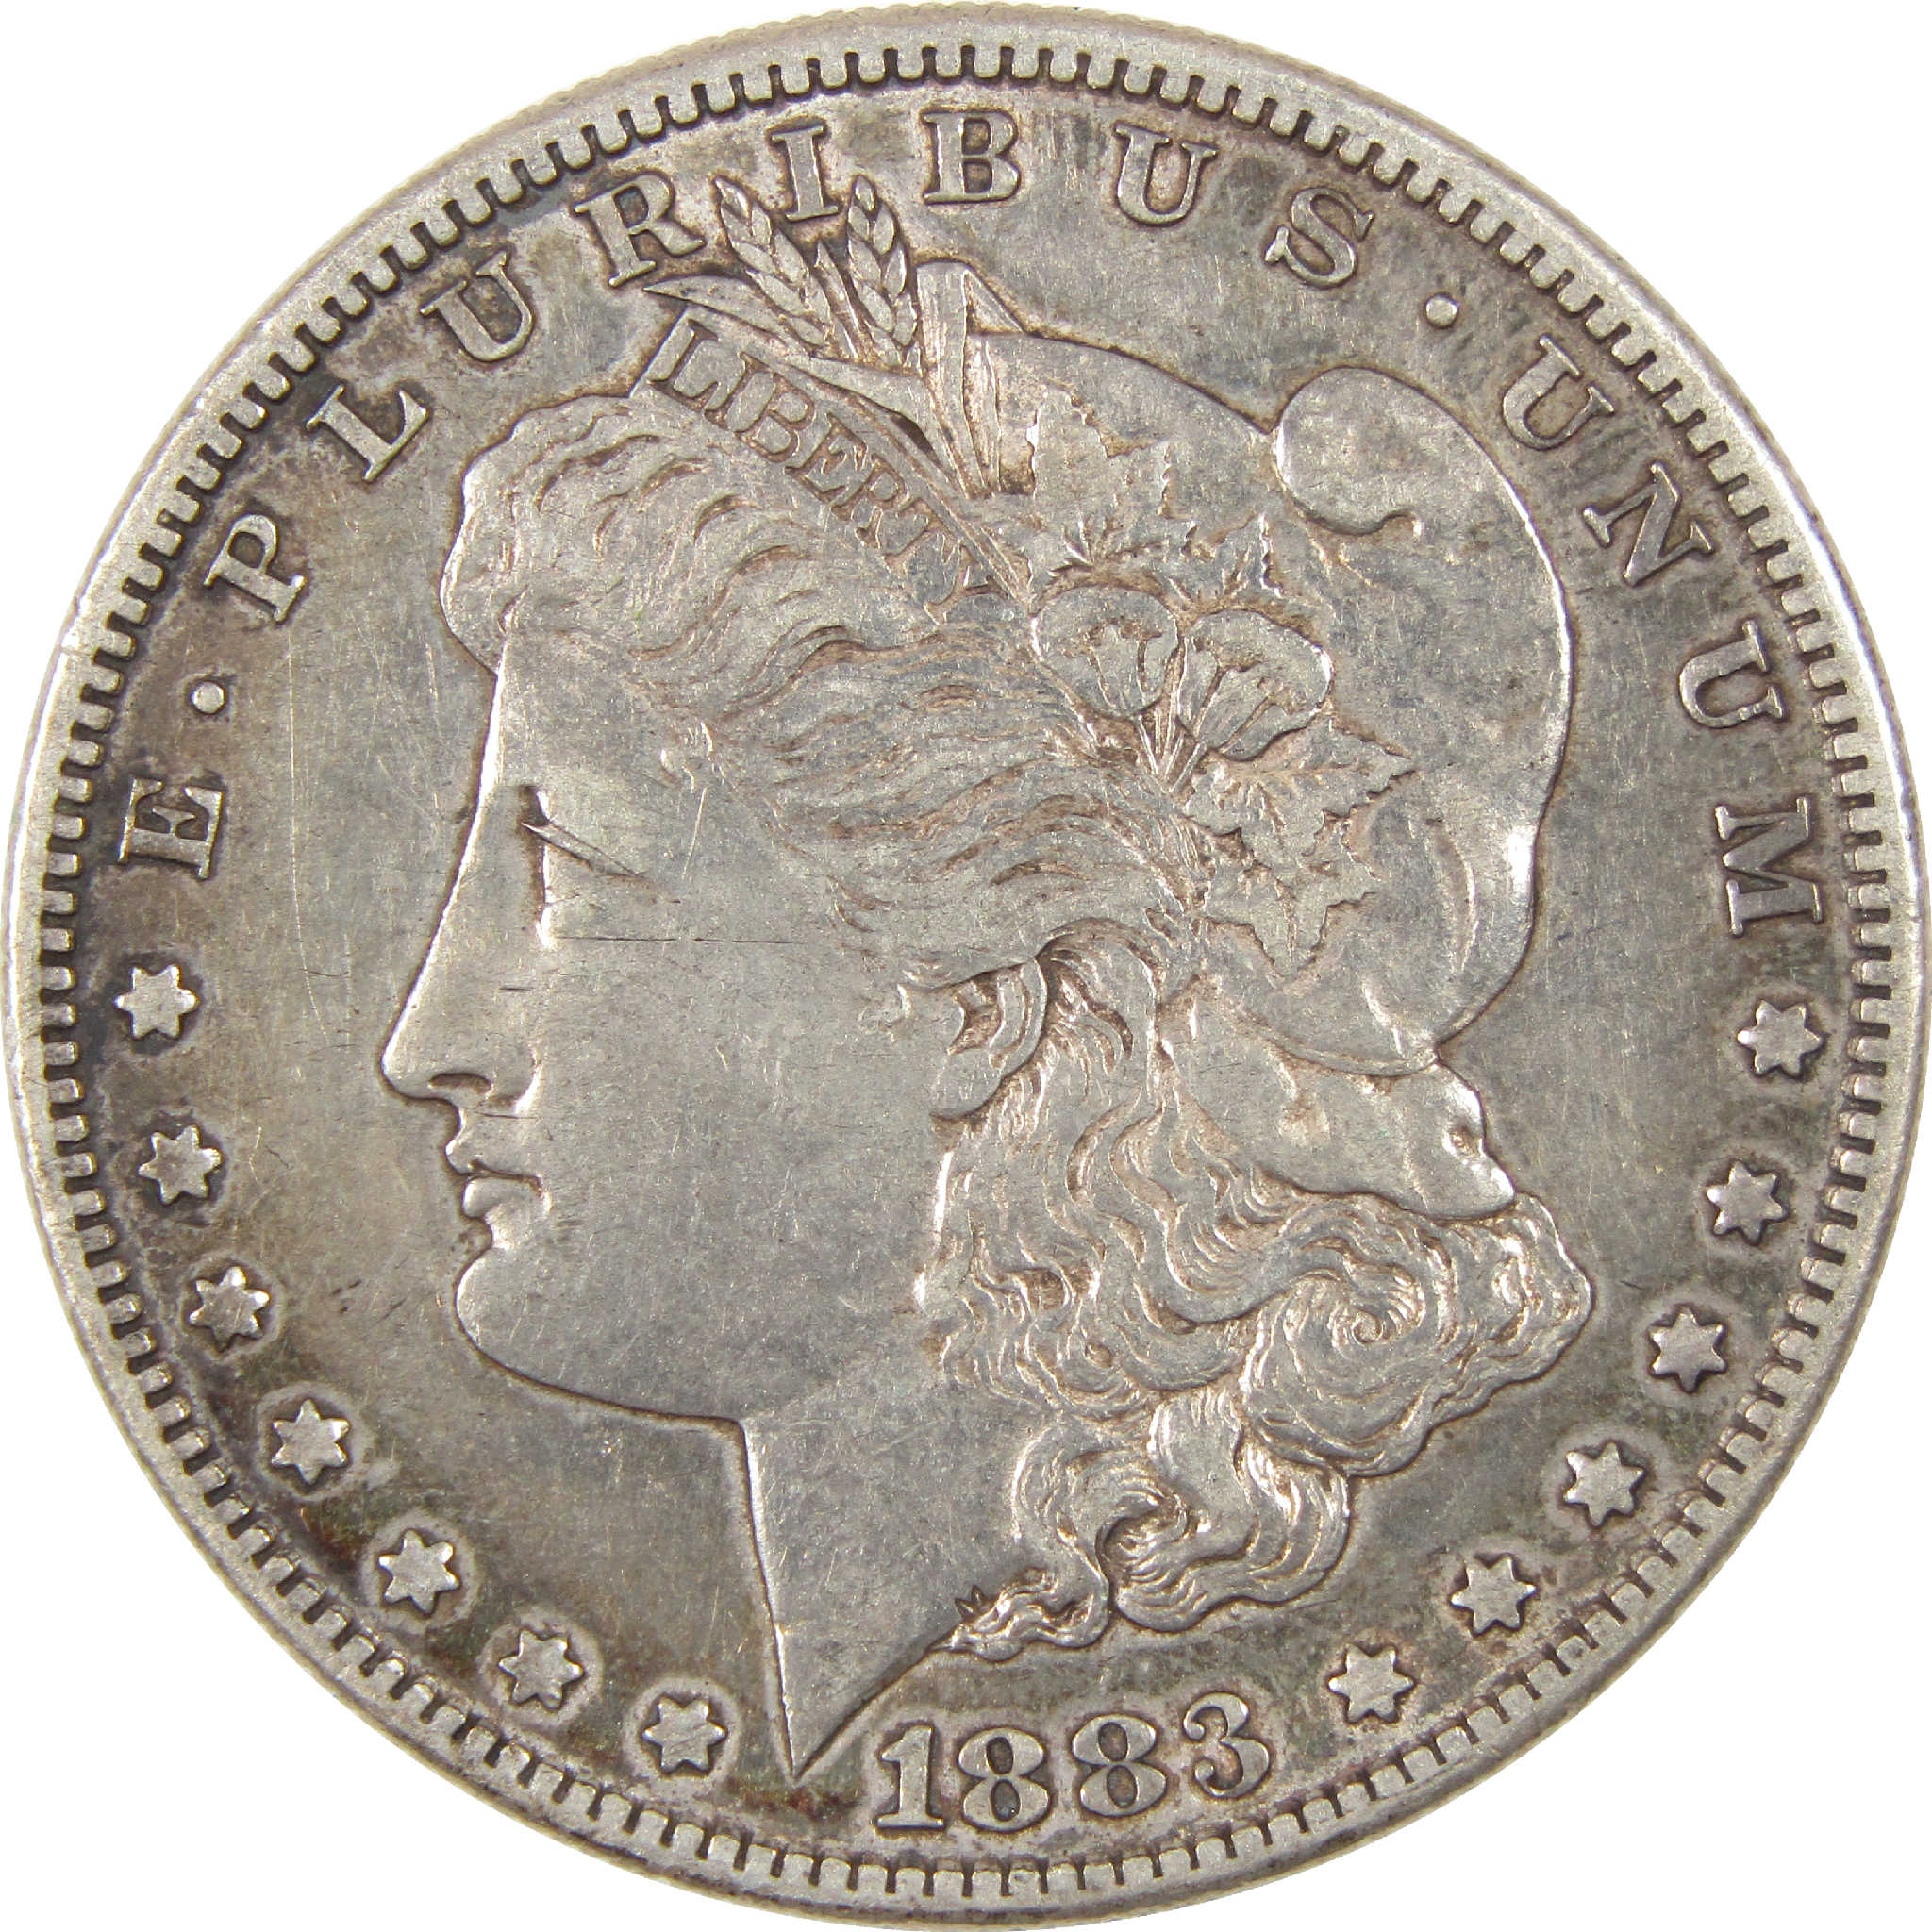 1883 S Morgan Dollar XF EF Extremely Fine Silver $1 Coin SKU:I11280 - Morgan coin - Morgan silver dollar - Morgan silver dollar for sale - Profile Coins &amp; Collectibles